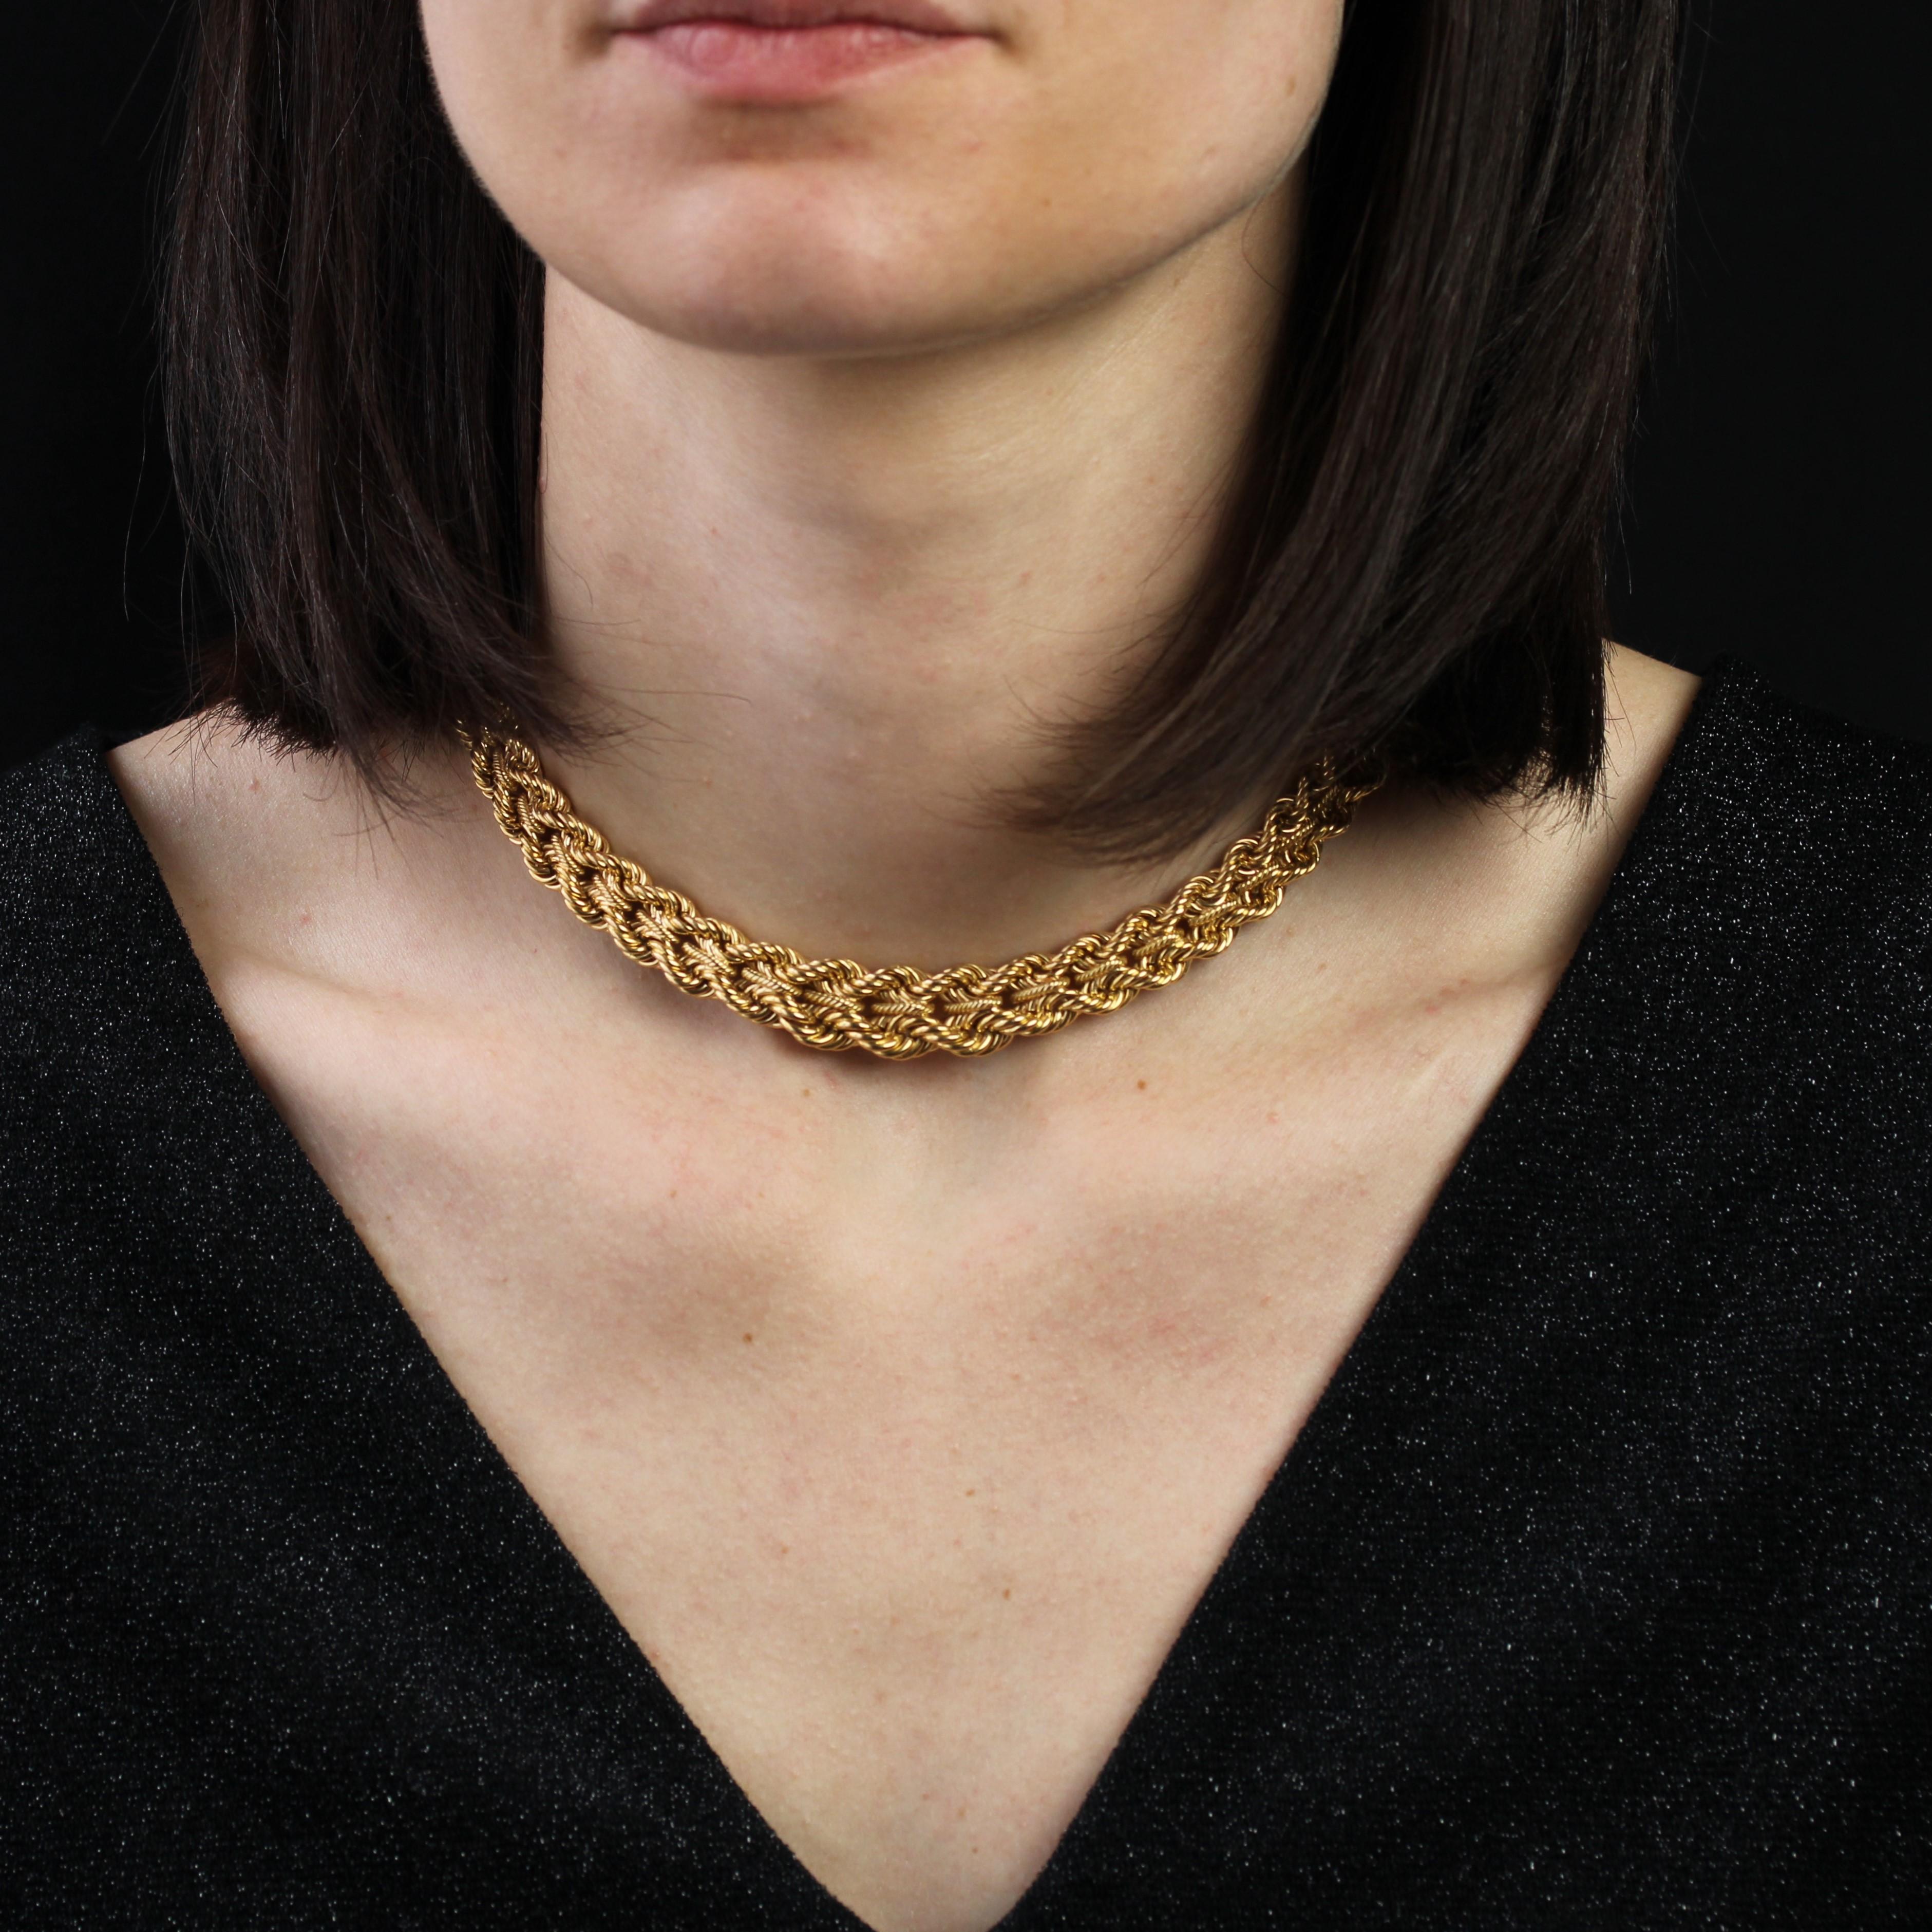 Necklace in 18 karat yellow gold, rhinoceros and eagle heads hallmarks.
Elegant vintage gold necklace featuring a mesh of interwoven gold wires. The clasp is ratchet with 8 safety catches.
Length : 36,5 cm approximately, width : to 7.7 mm to 12.5 mm